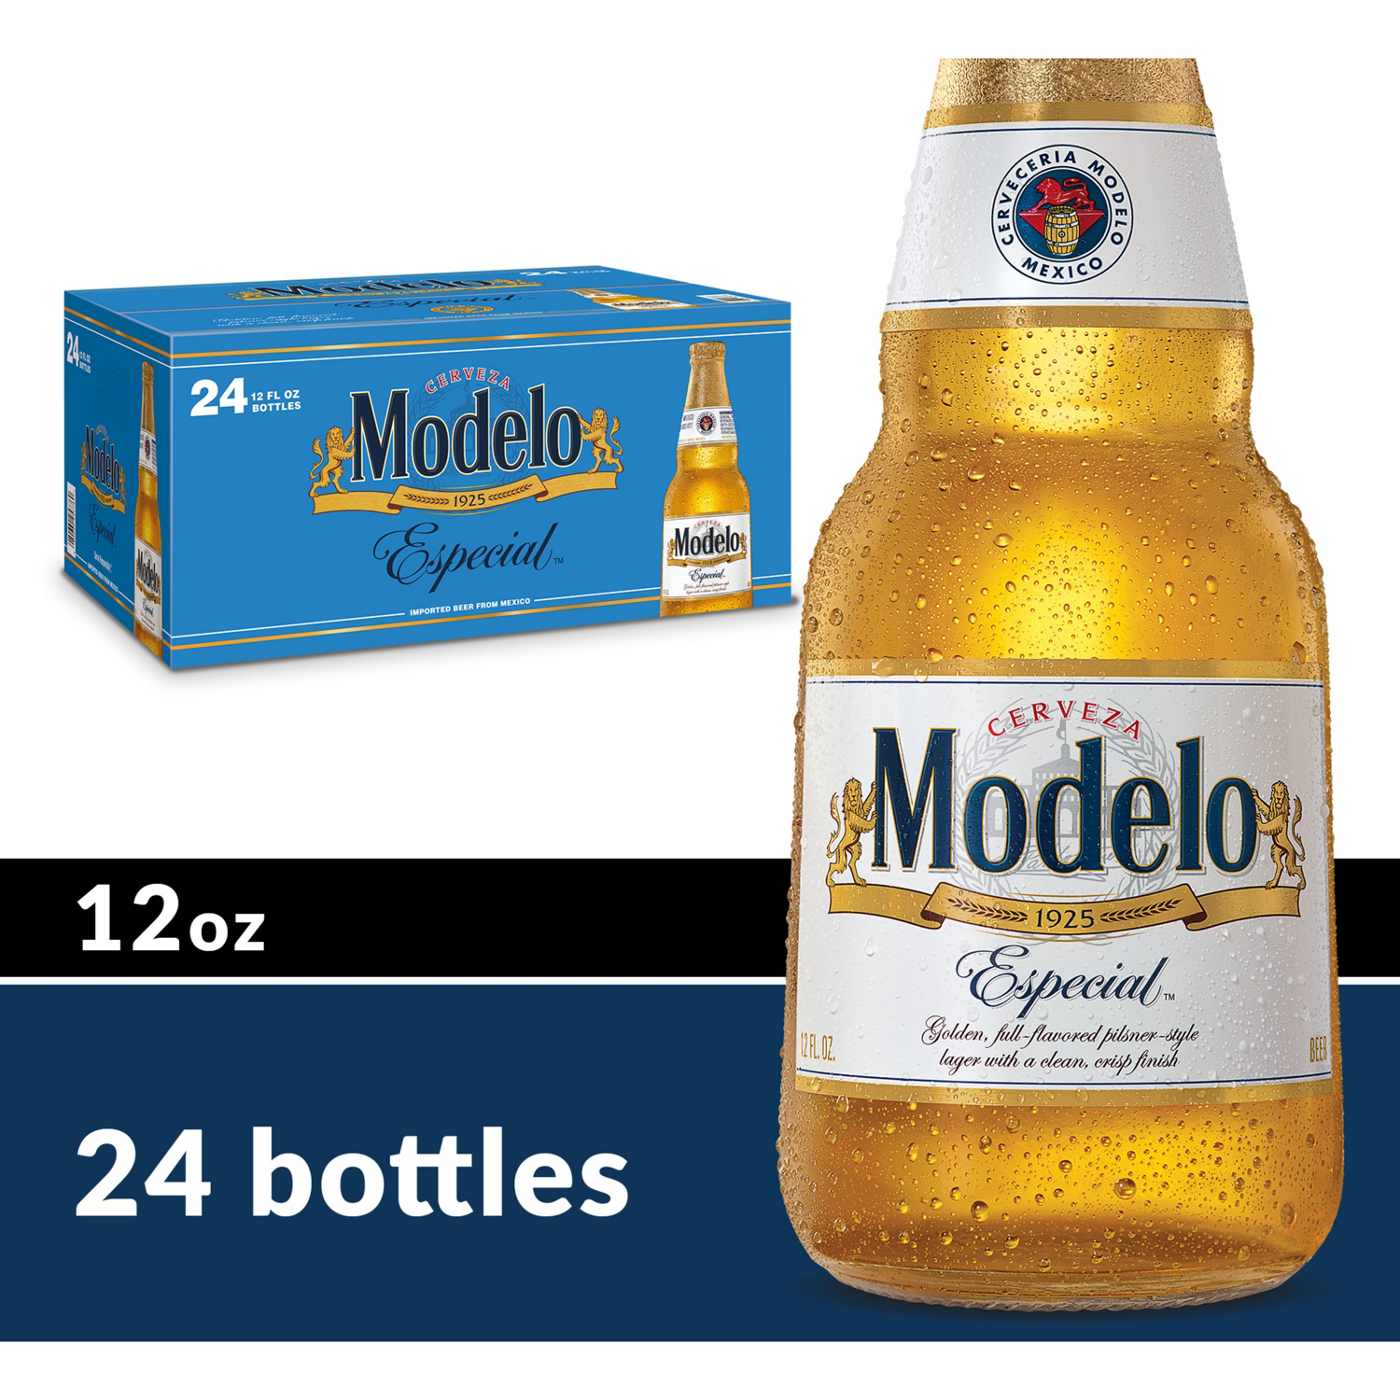 Modelo Especial Mexican Lager Import Beer 12 oz Bottles, 24 pk; image 4 of 10